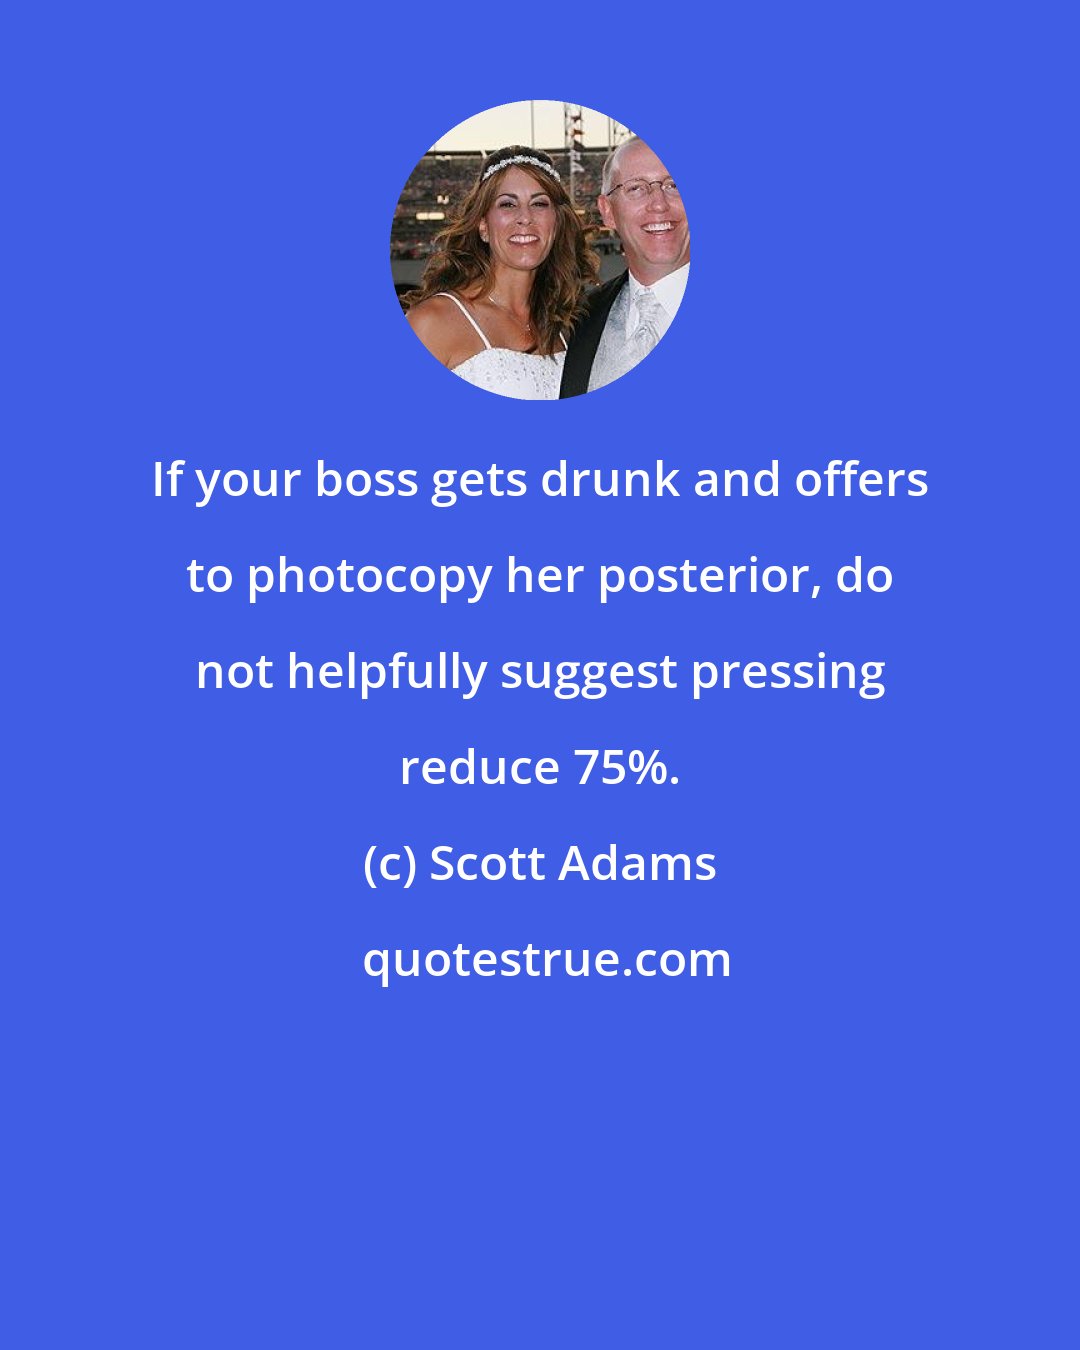 Scott Adams: If your boss gets drunk and offers to photocopy her posterior, do not helpfully suggest pressing reduce 75%.